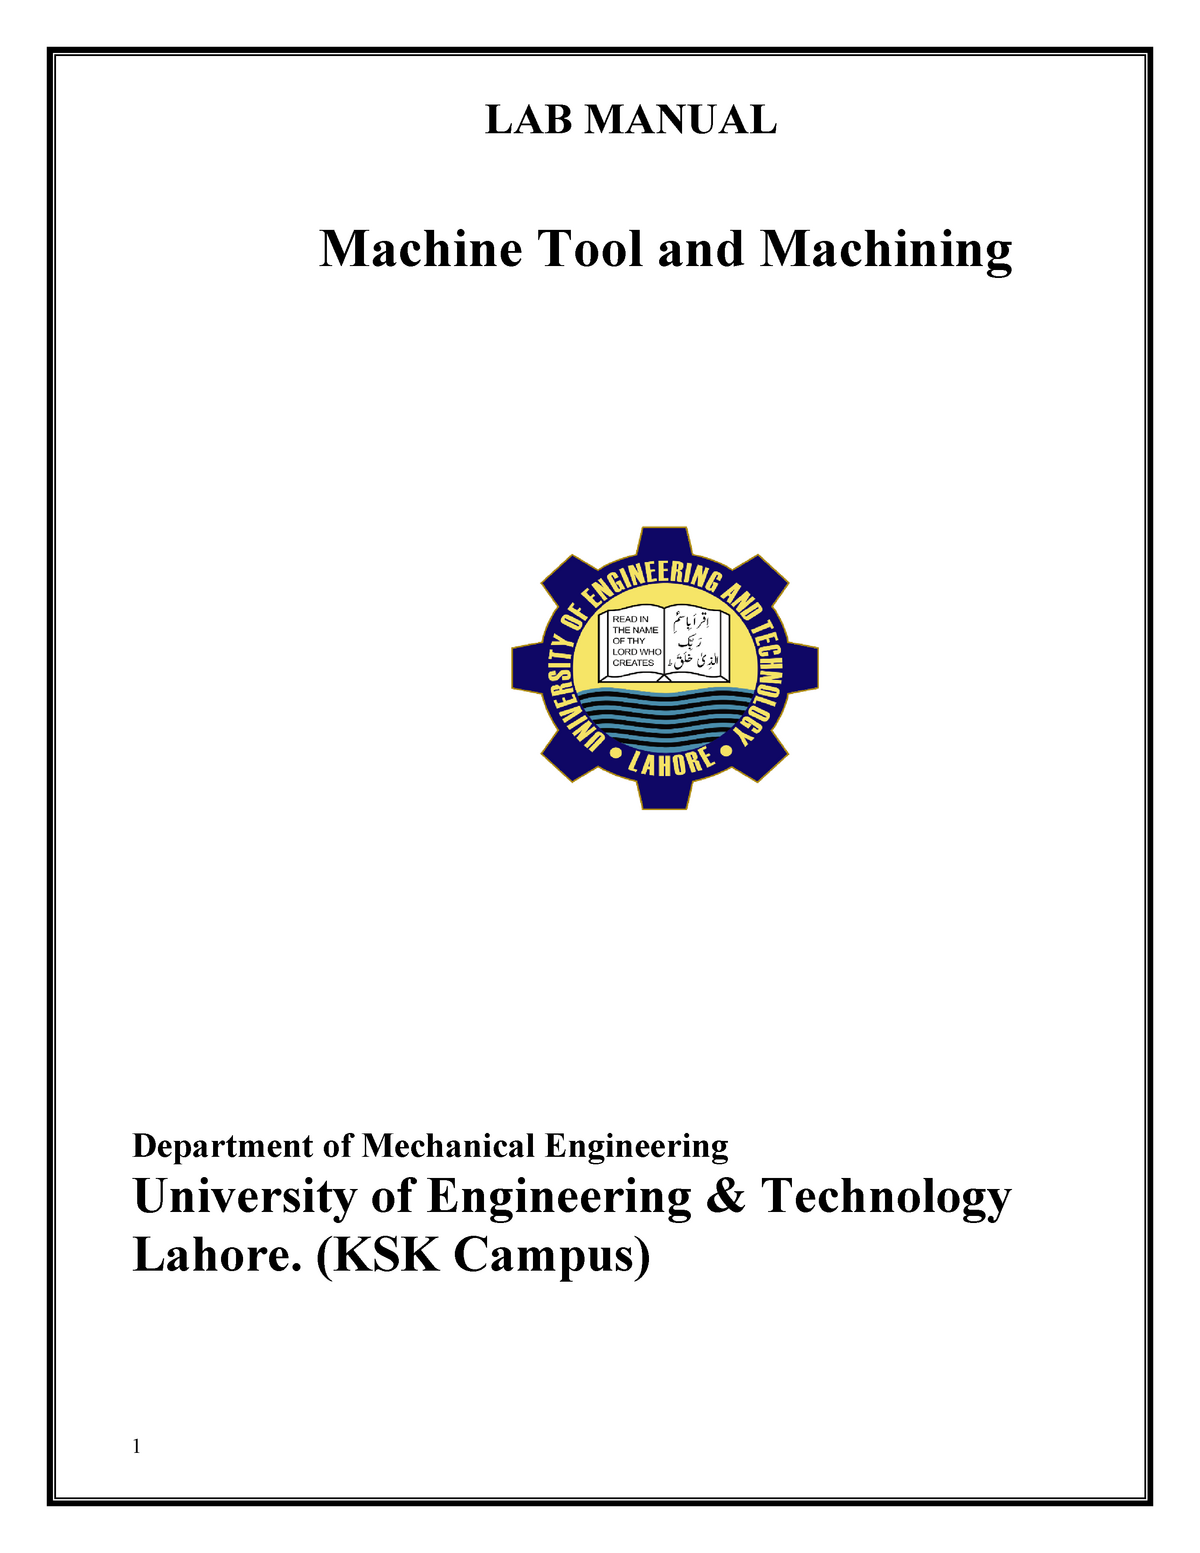 research paper on machine tools